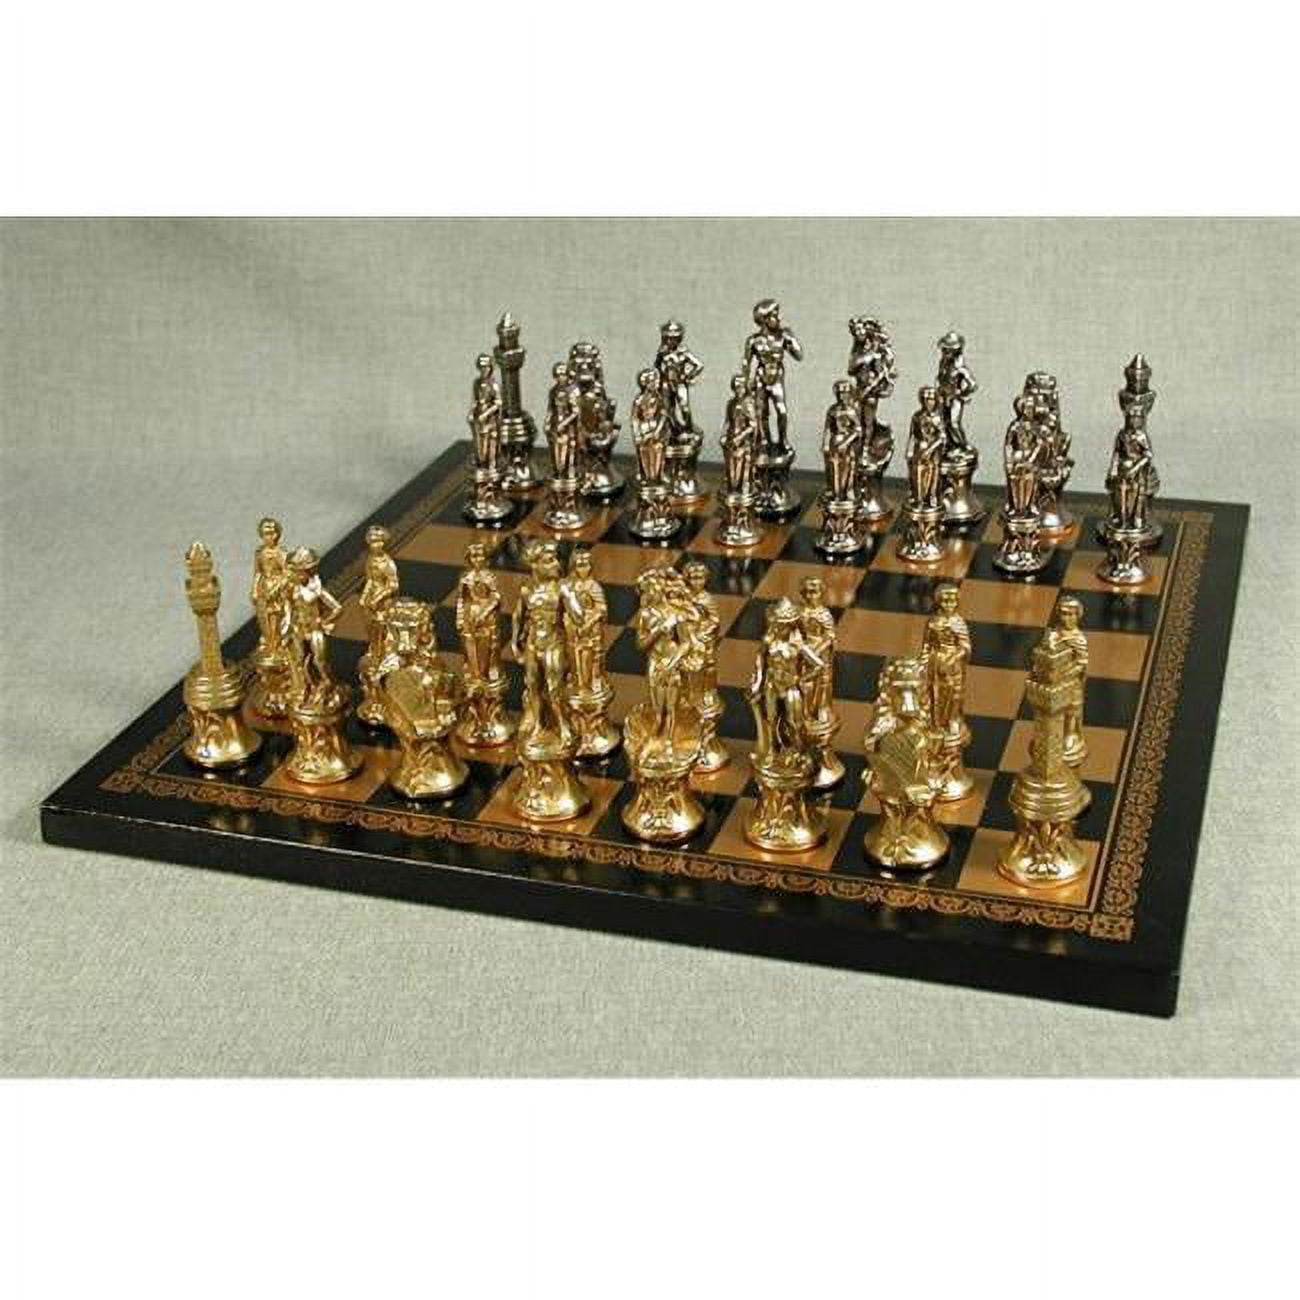 Florence - in. Italian Ital 99M-201GN 3.25 Fama Set with Board Chess Chess Kings Metal Leather